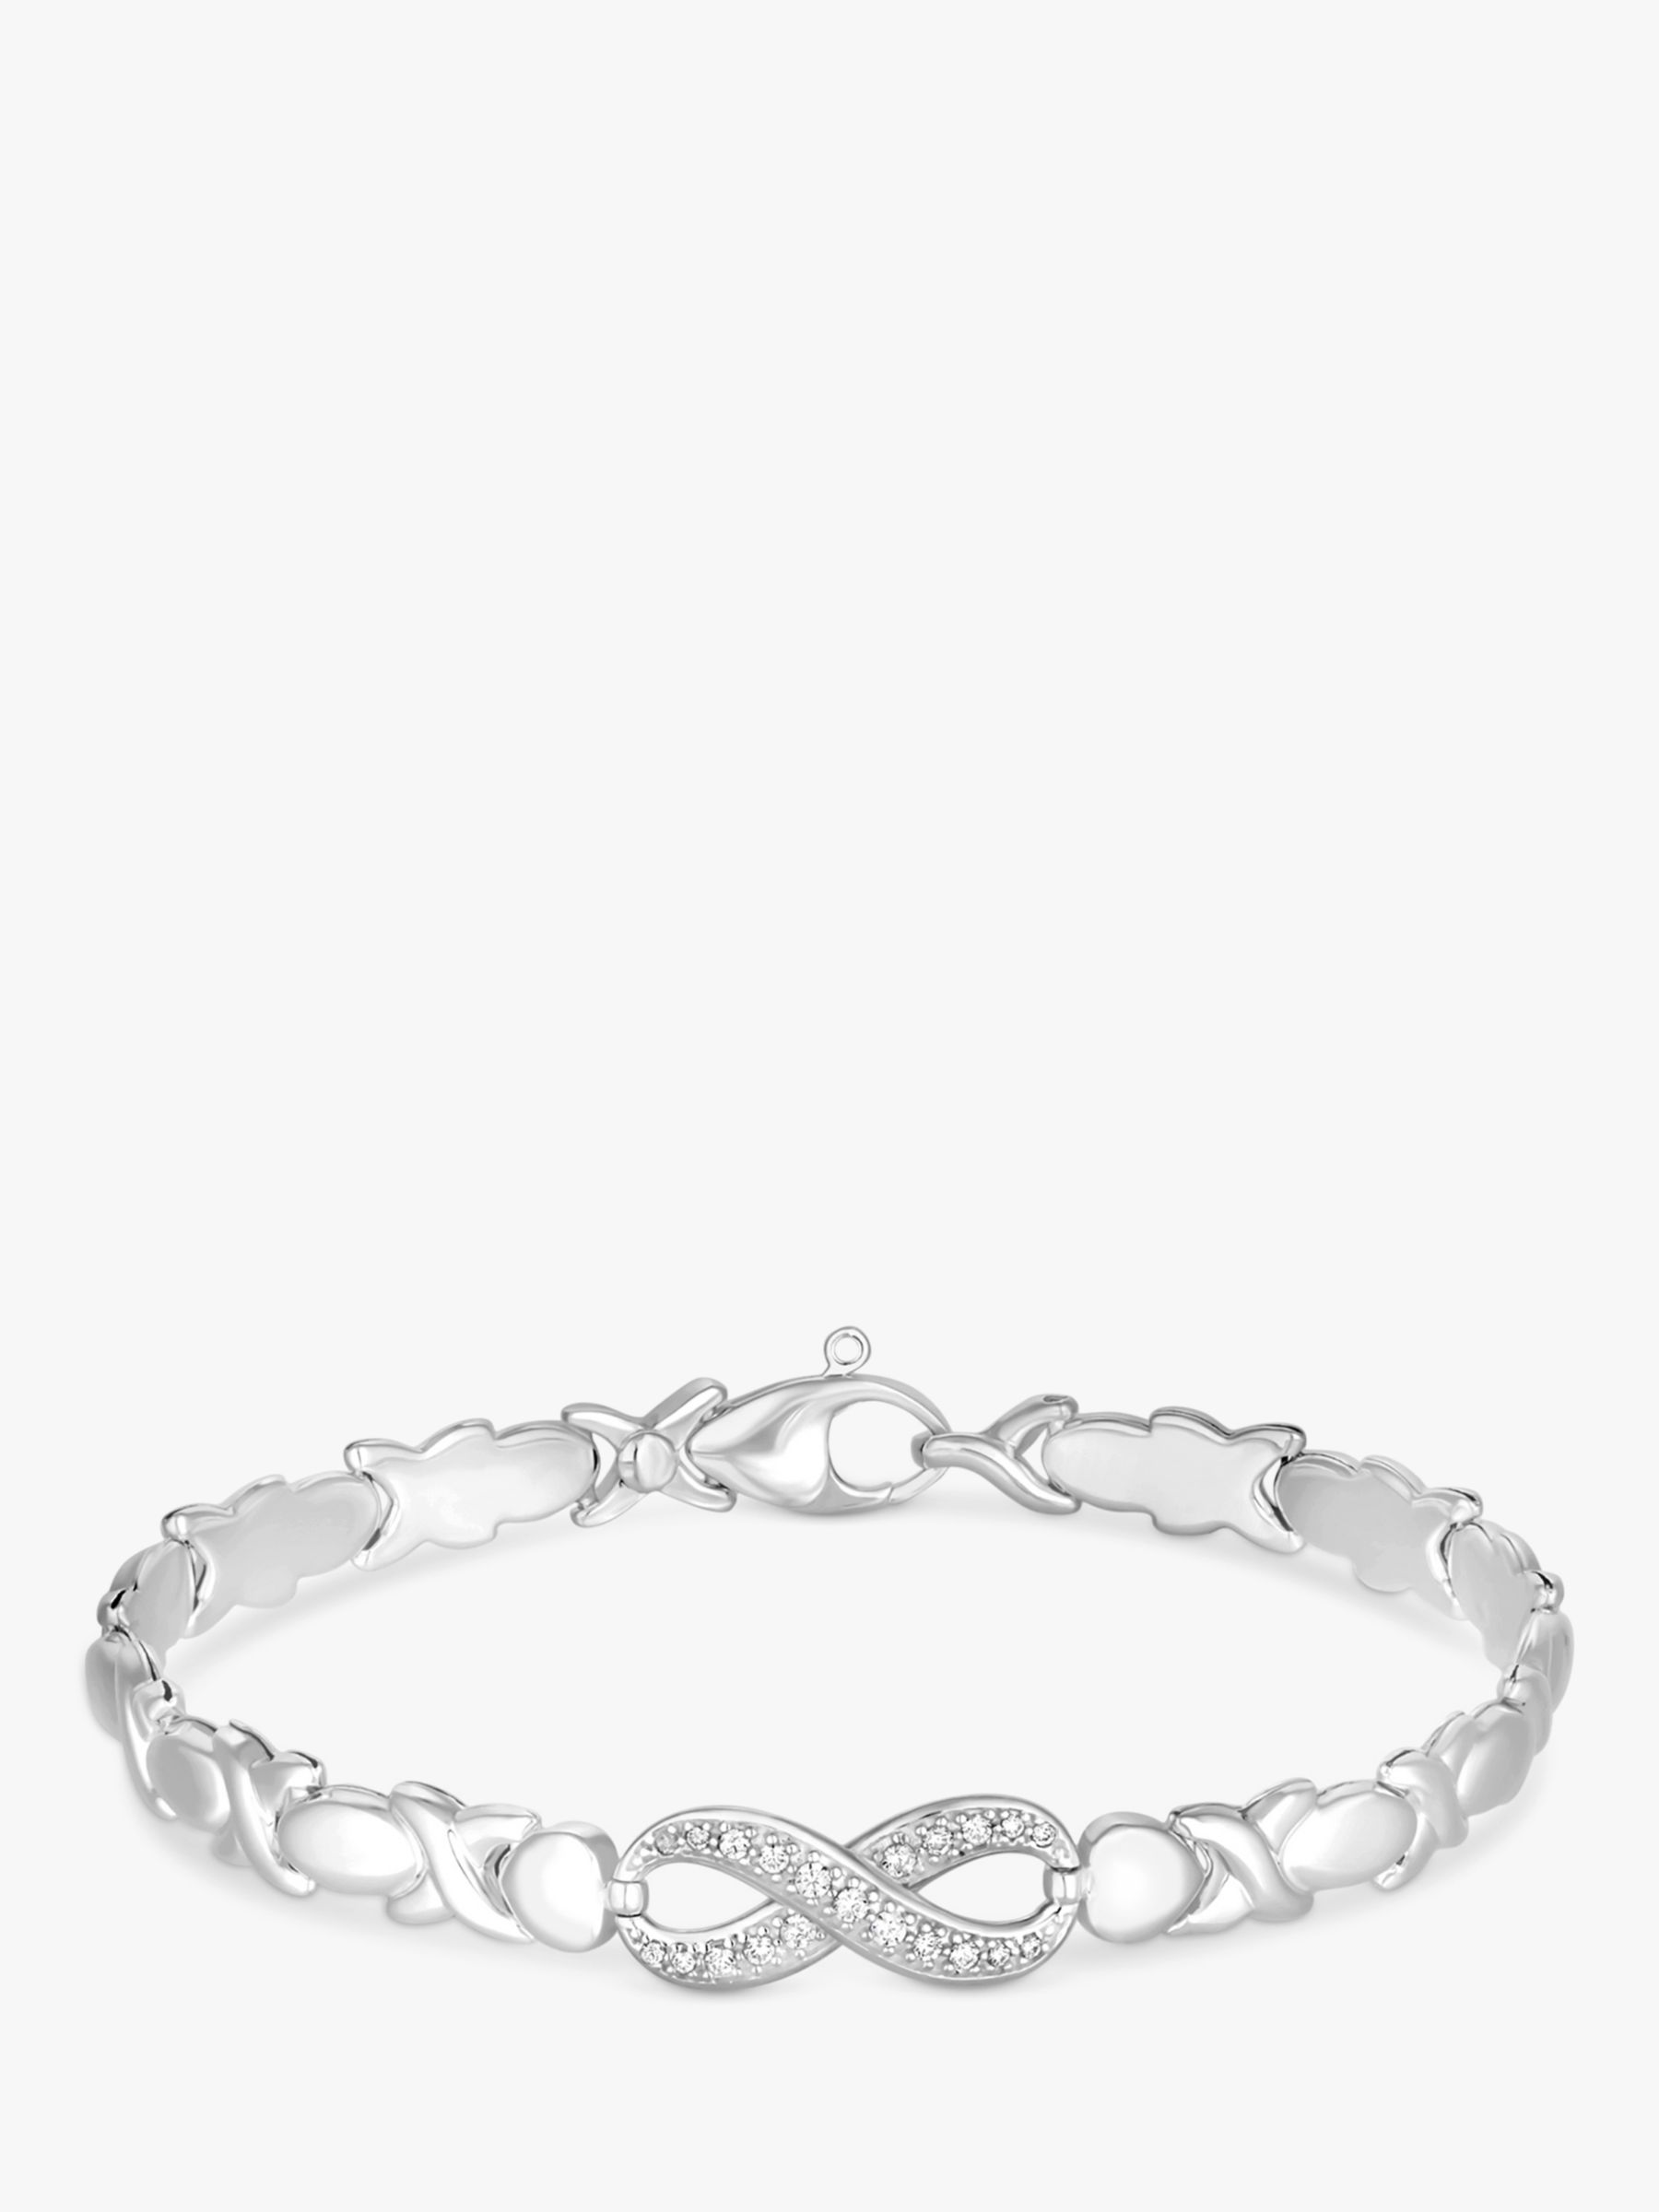 Buy Simply Silver Sterling Silver Infinity Kiss Bracelet, Silver Online at johnlewis.com